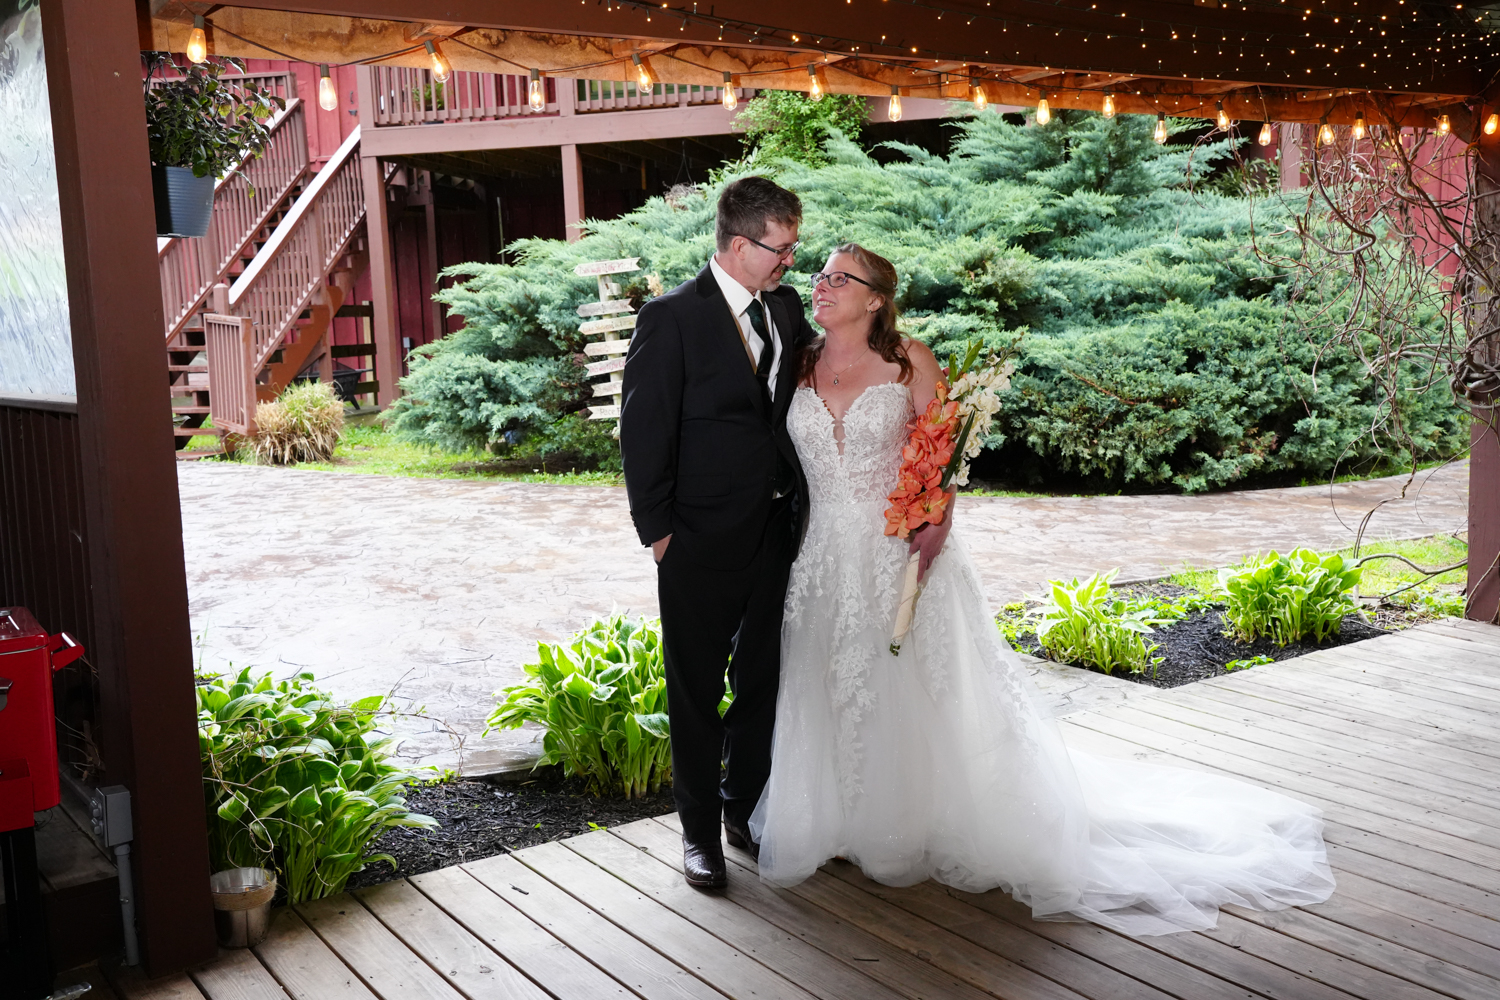 Wedding couple smiling at each other beneath a rustic pavilion with warm lights above them